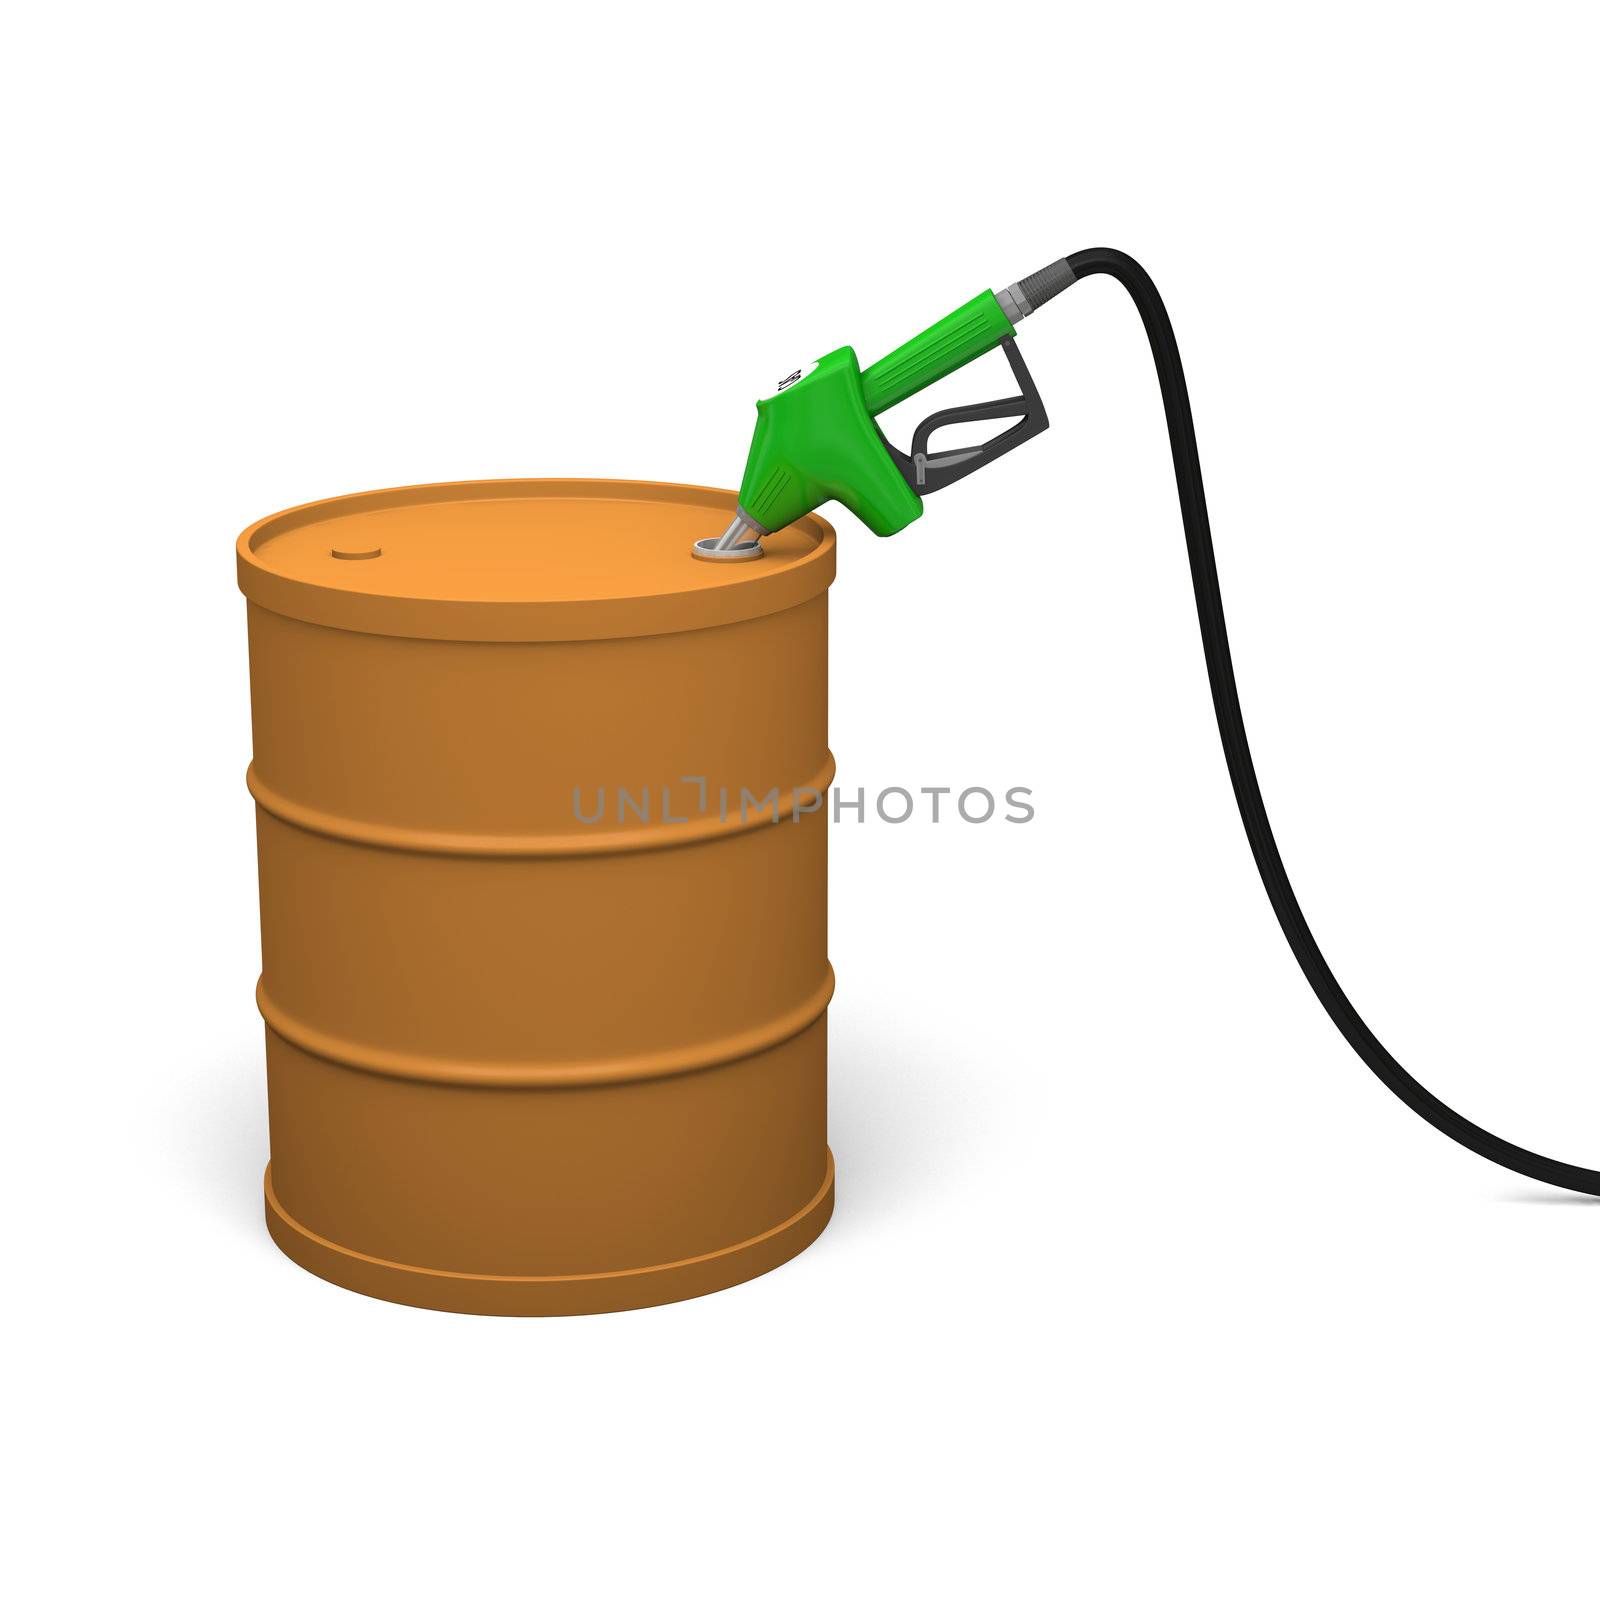 Fuel nozzle pumping fuel into petrol barrel, isolated on white background